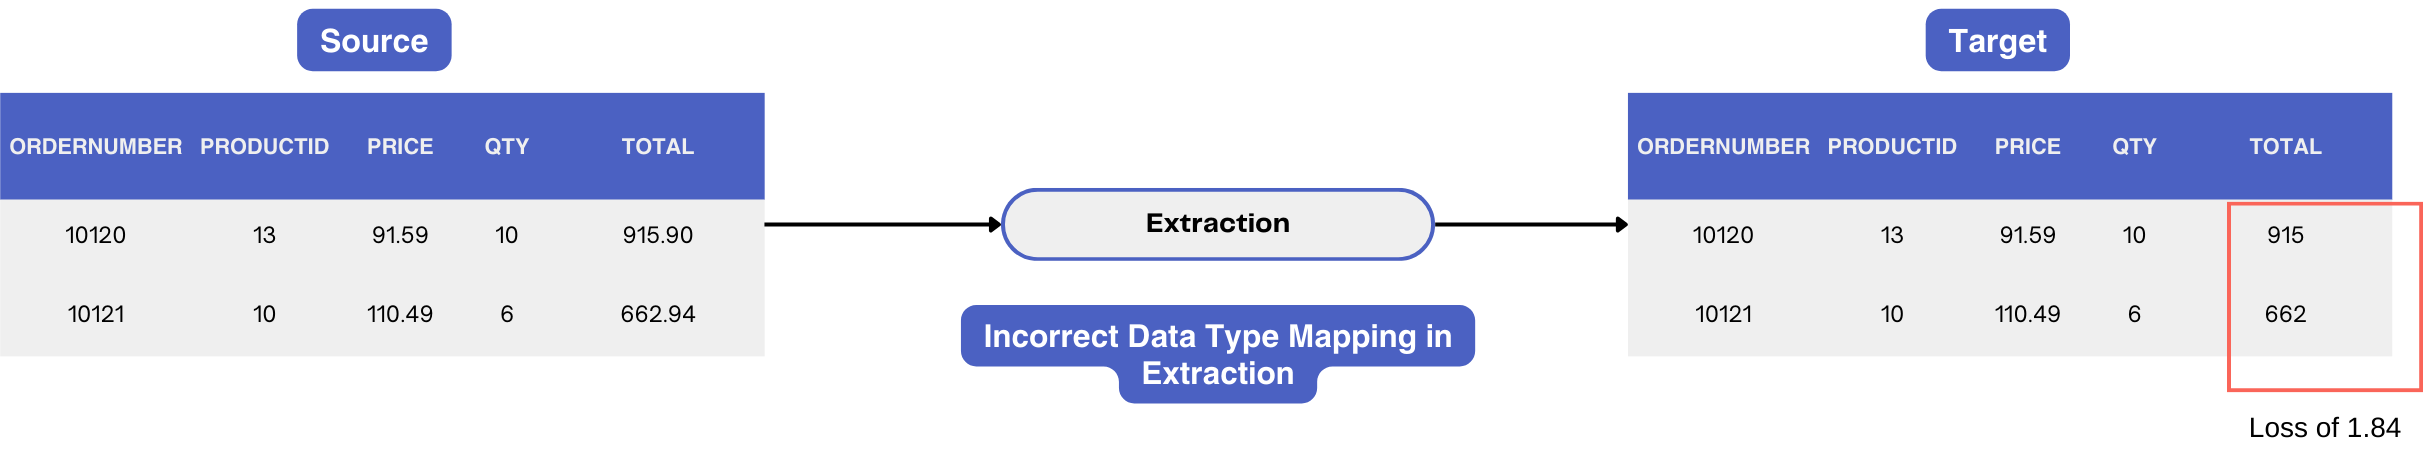 ETL Extraction Testing: Incorrect data type mapping